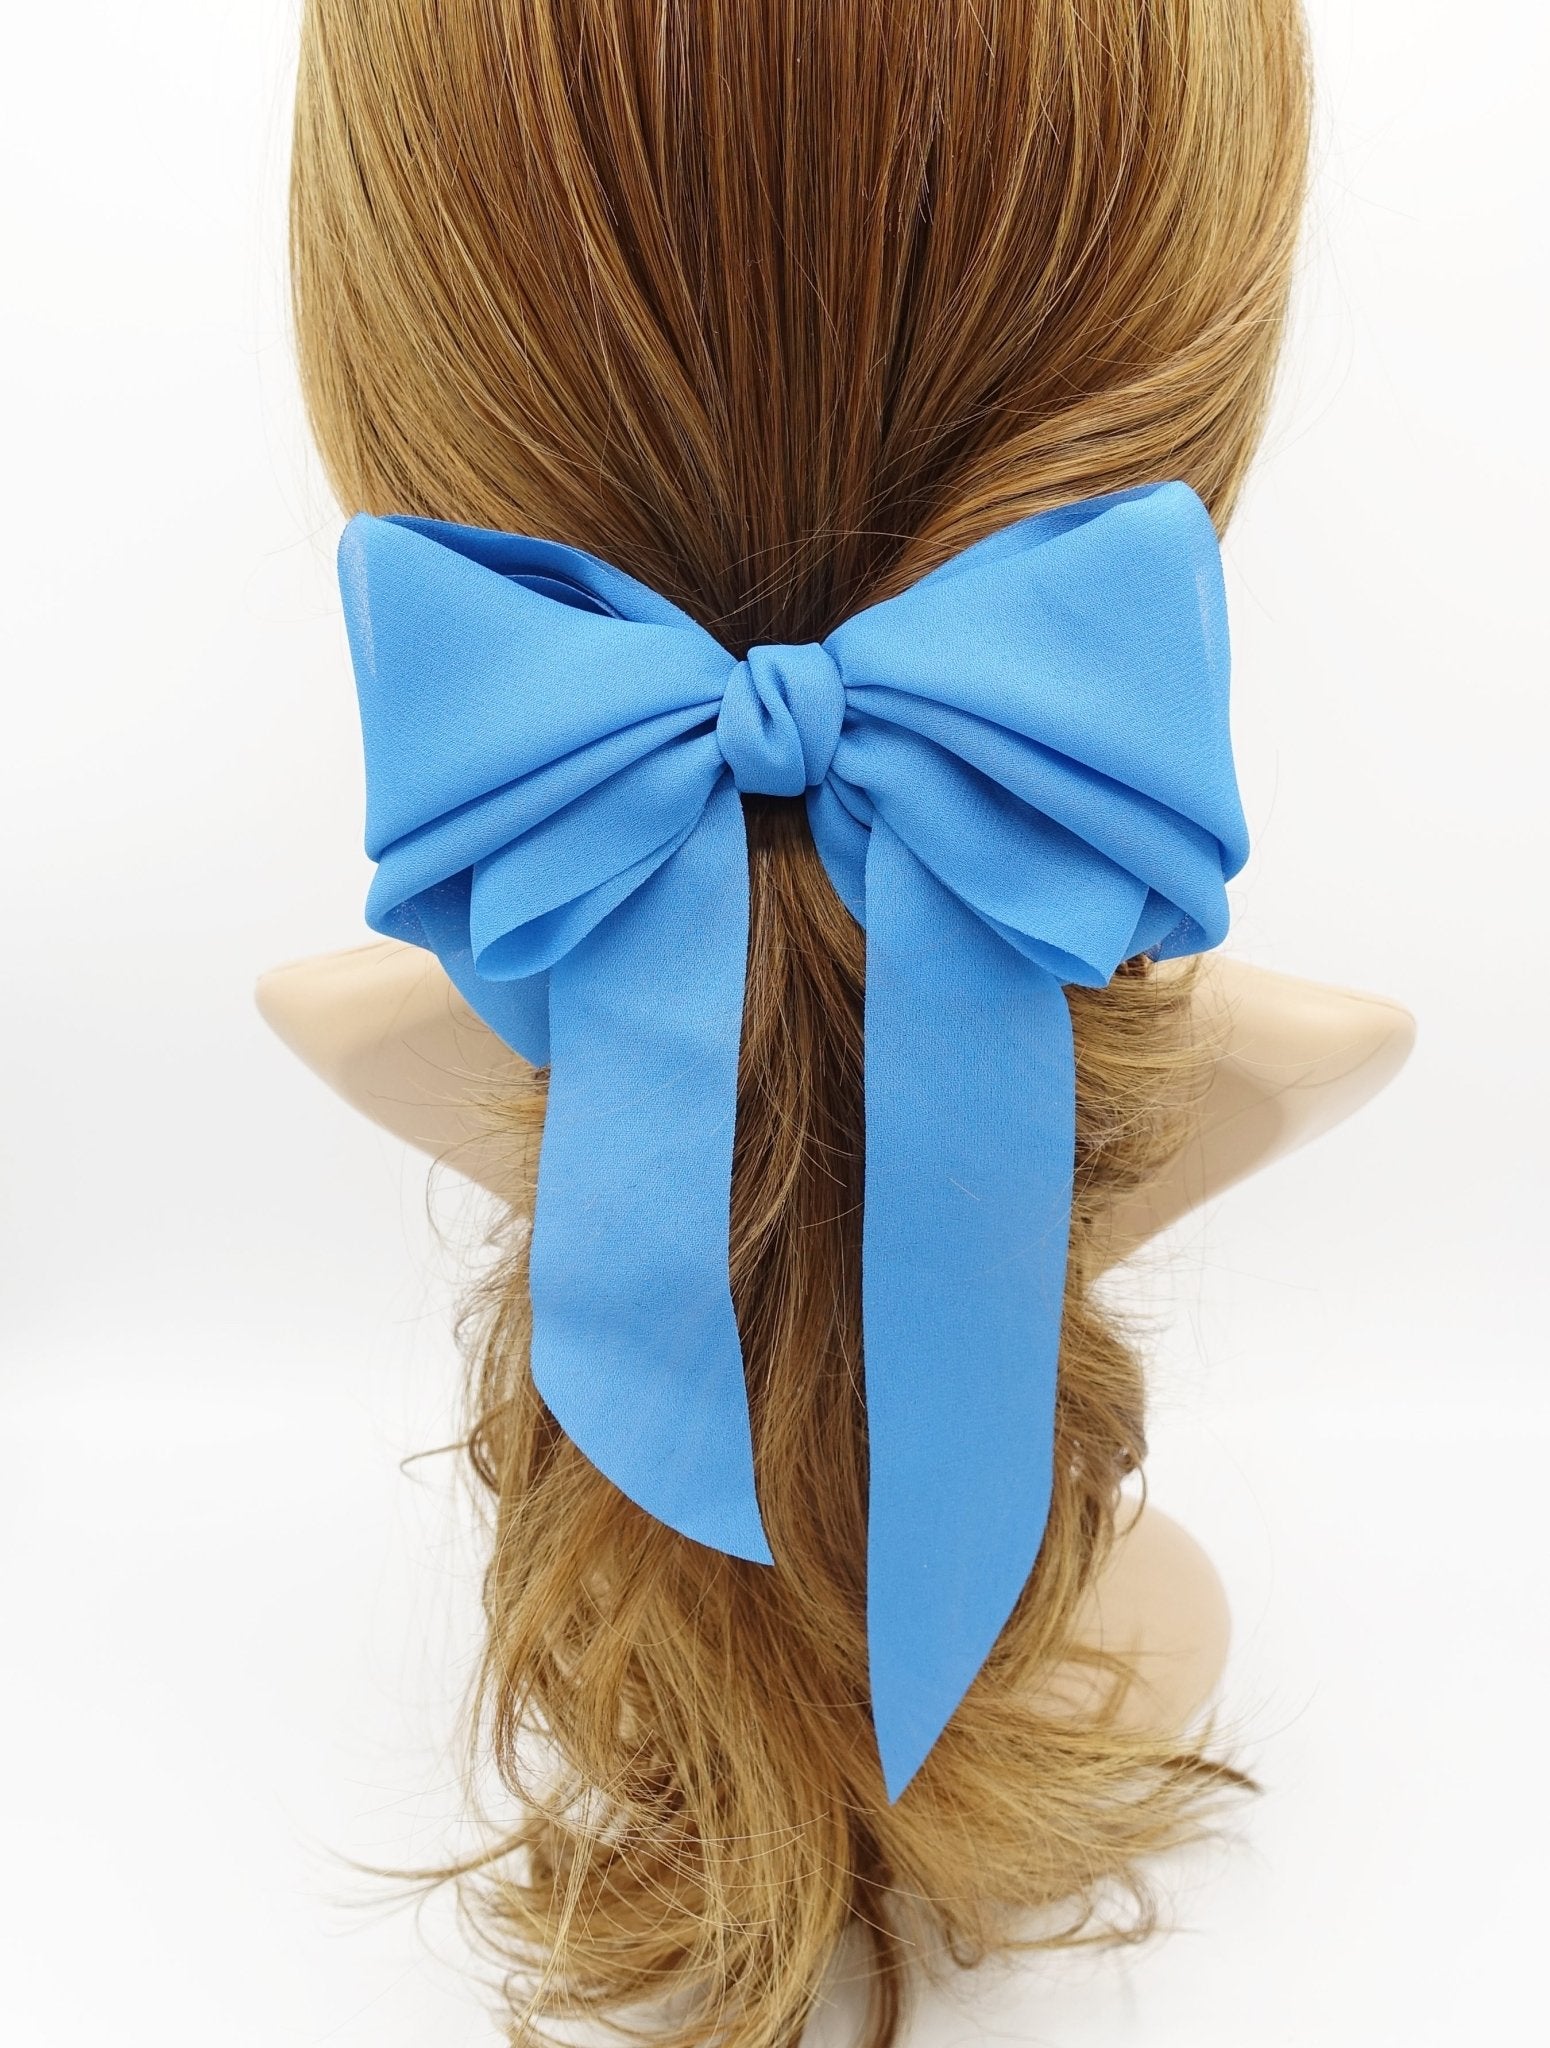 VeryShine Barrettes & Clips Sky blue chiffon hair bow wing stacked style solid color VeryShine hair accessories for women